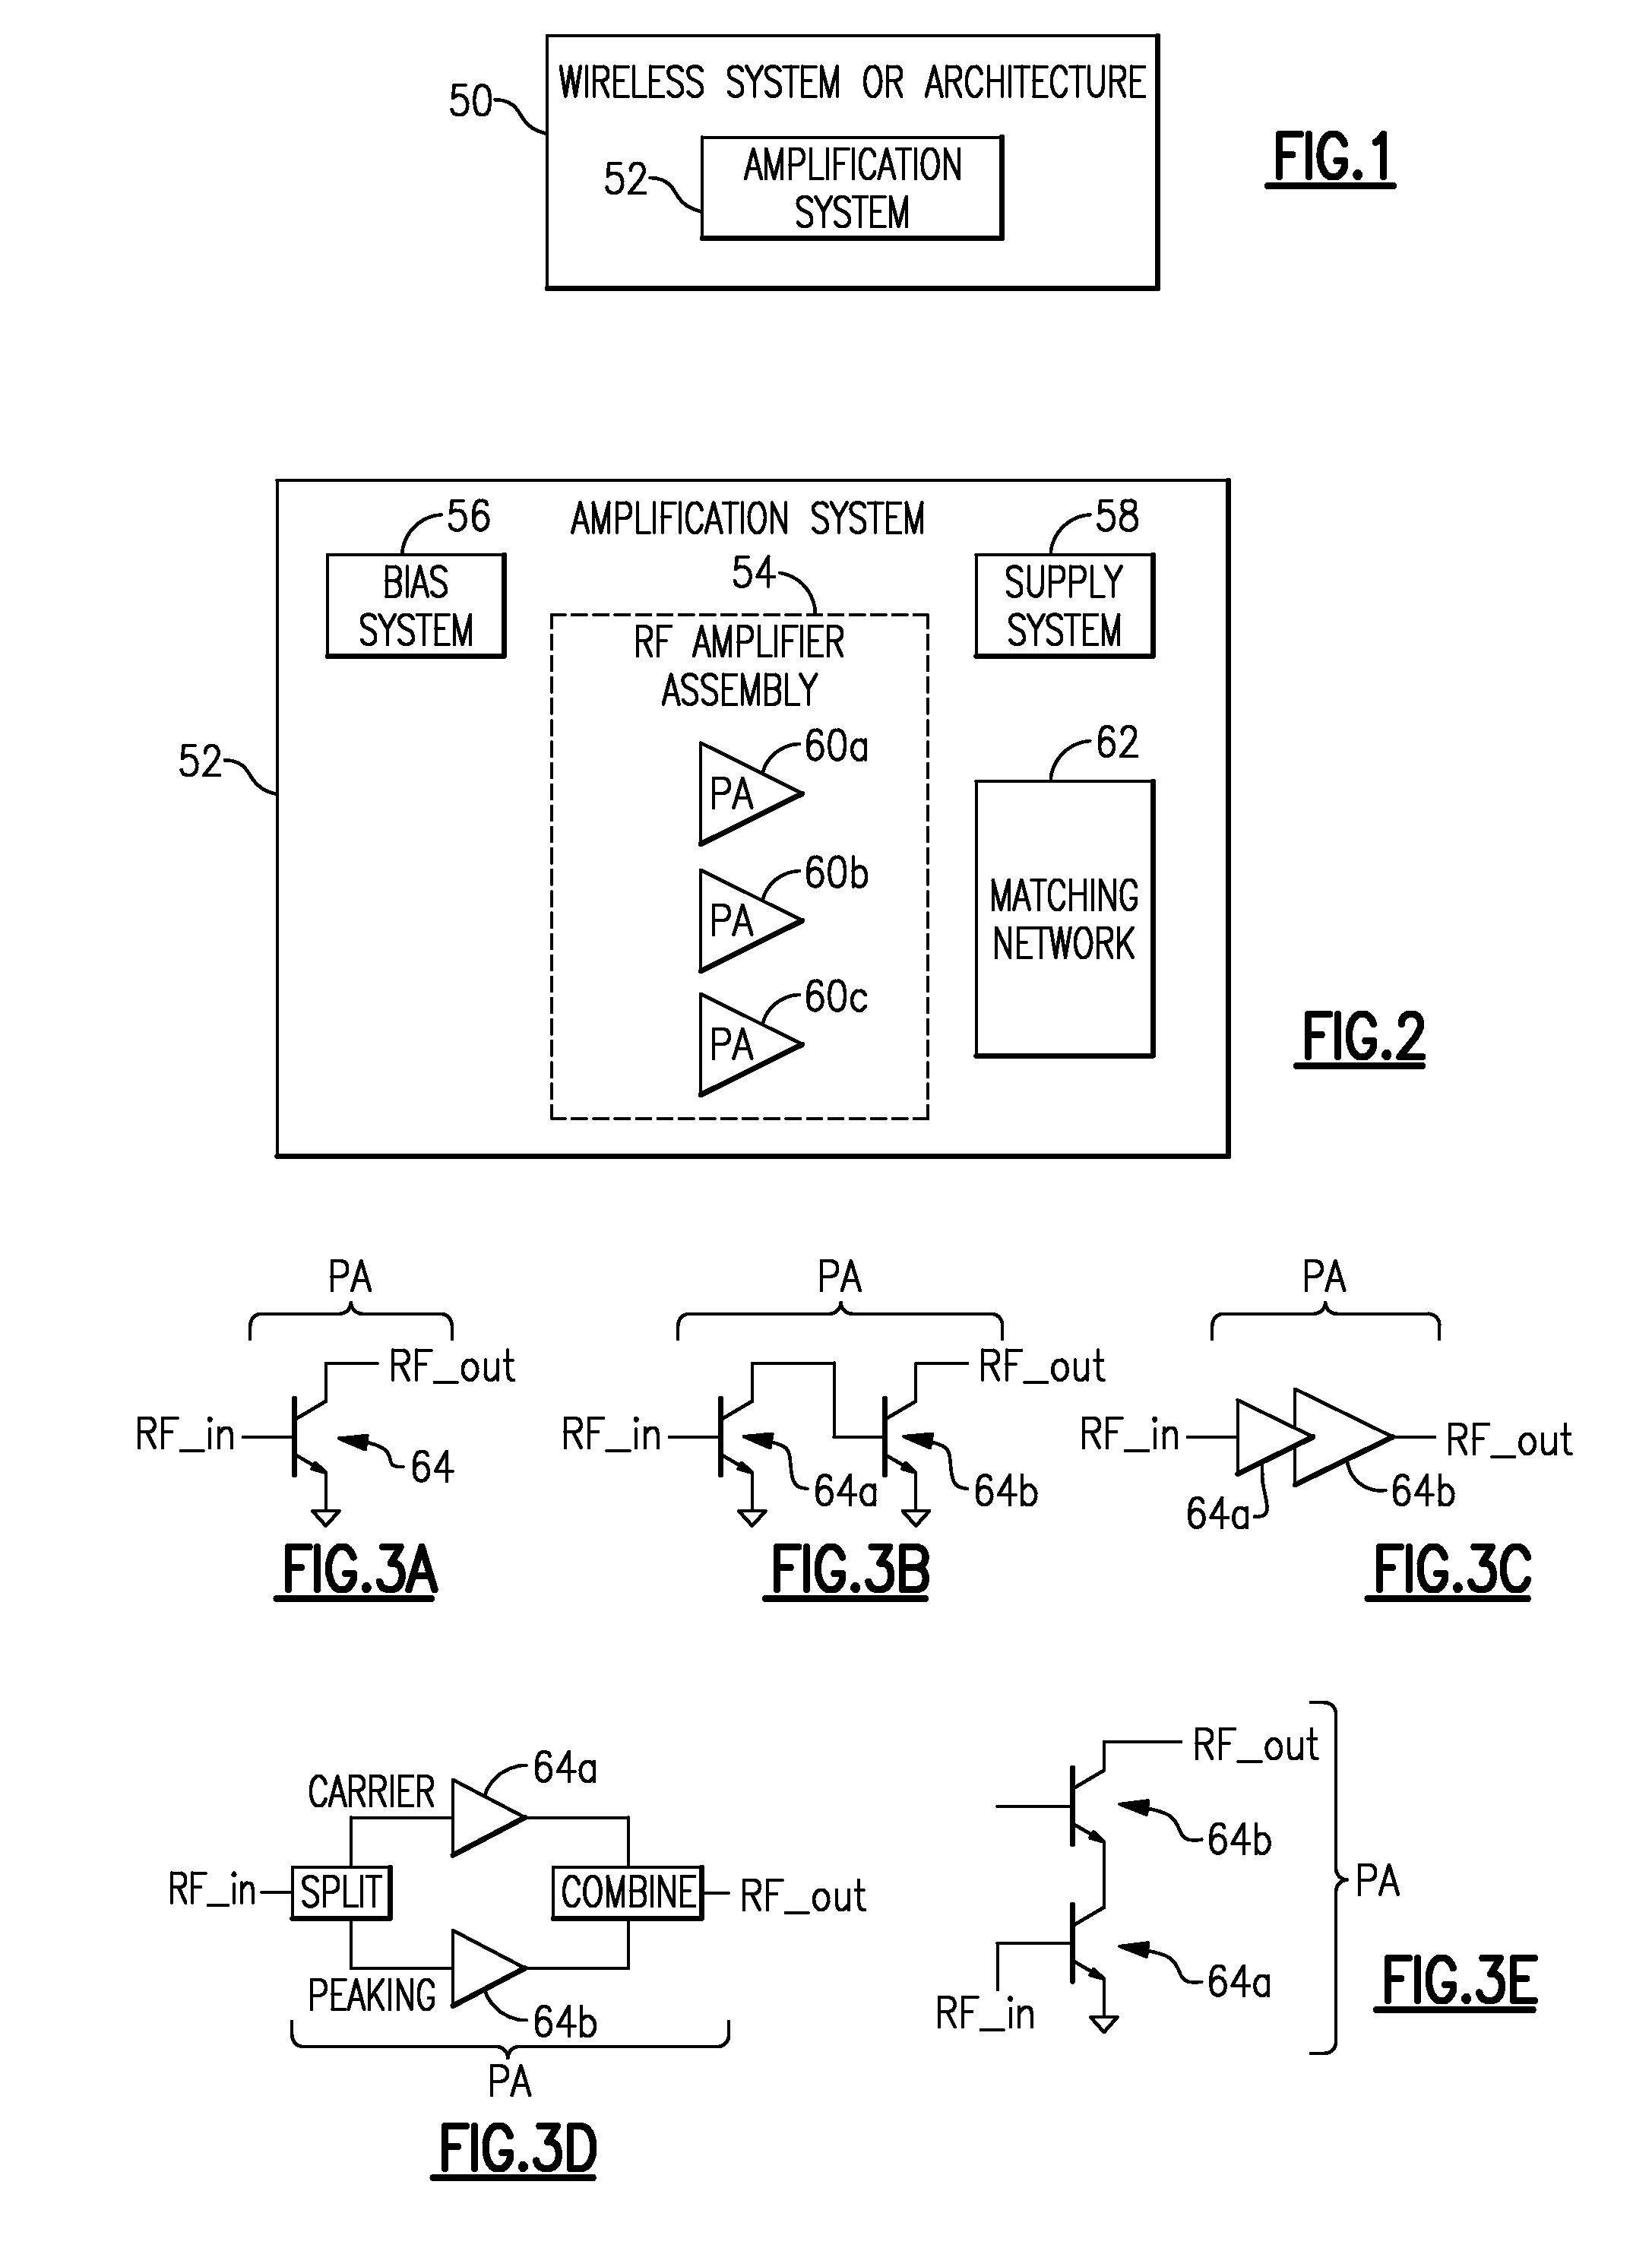 Radio-frequency power amplifiers driven by boost converter